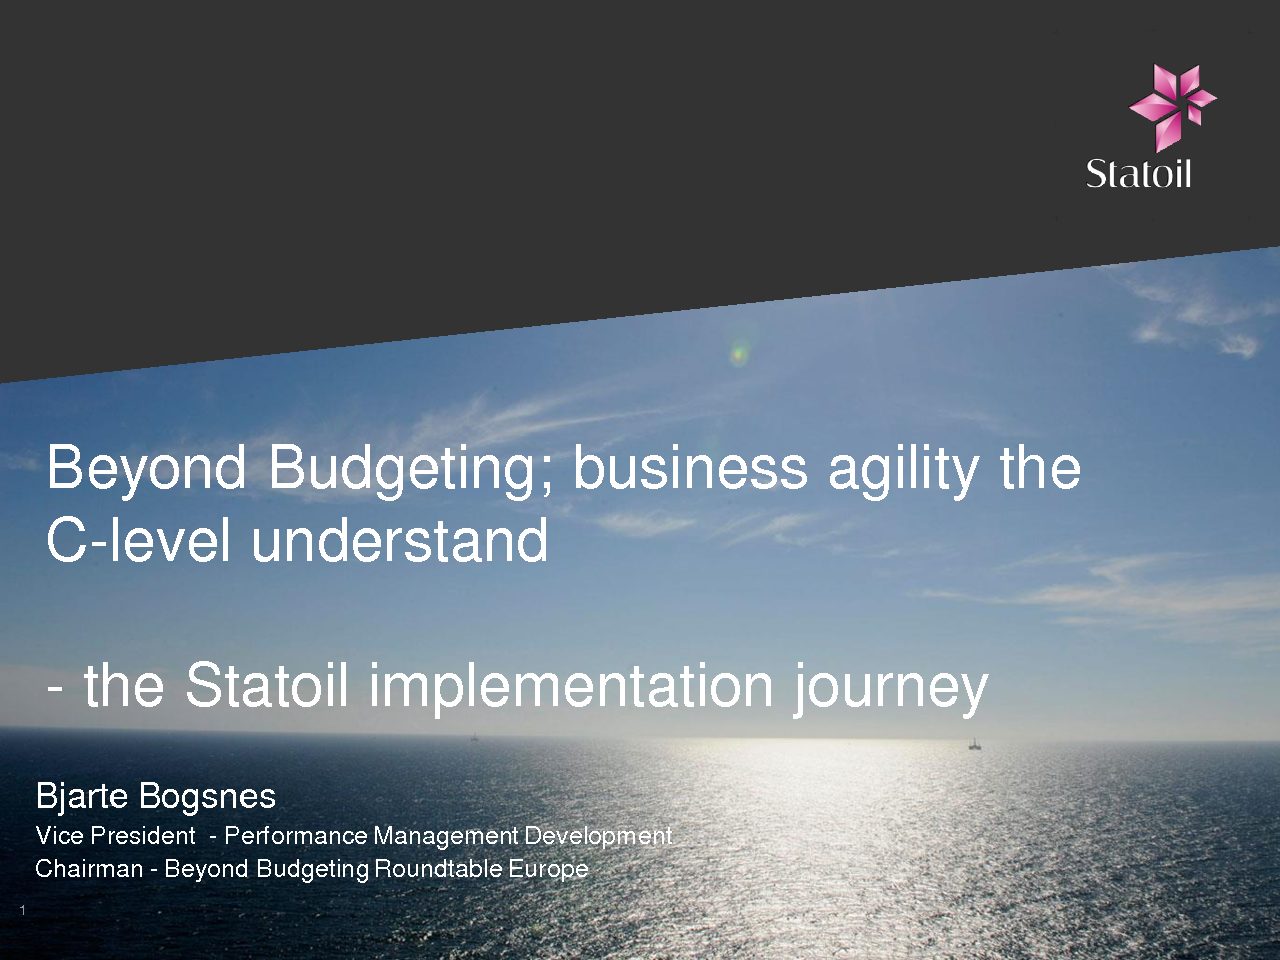 Beyond Budgeting – Business Agility the C-level Understand (and Are Starting to Like)